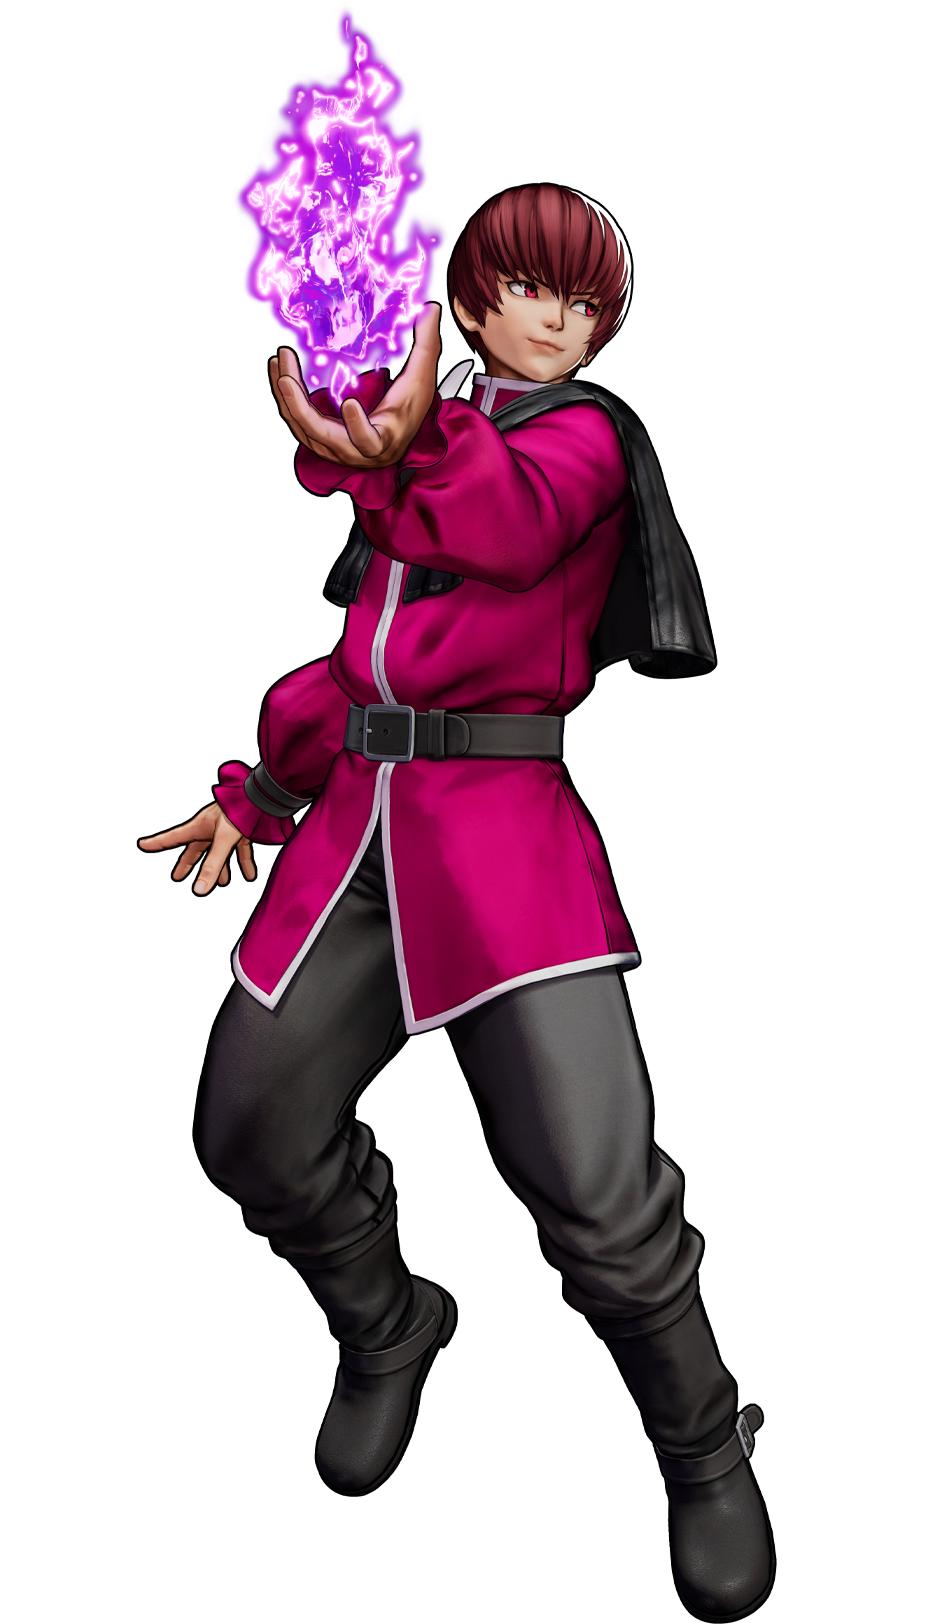 Chris announced for The King of Fighters 15 as the final member of Team  Orochi